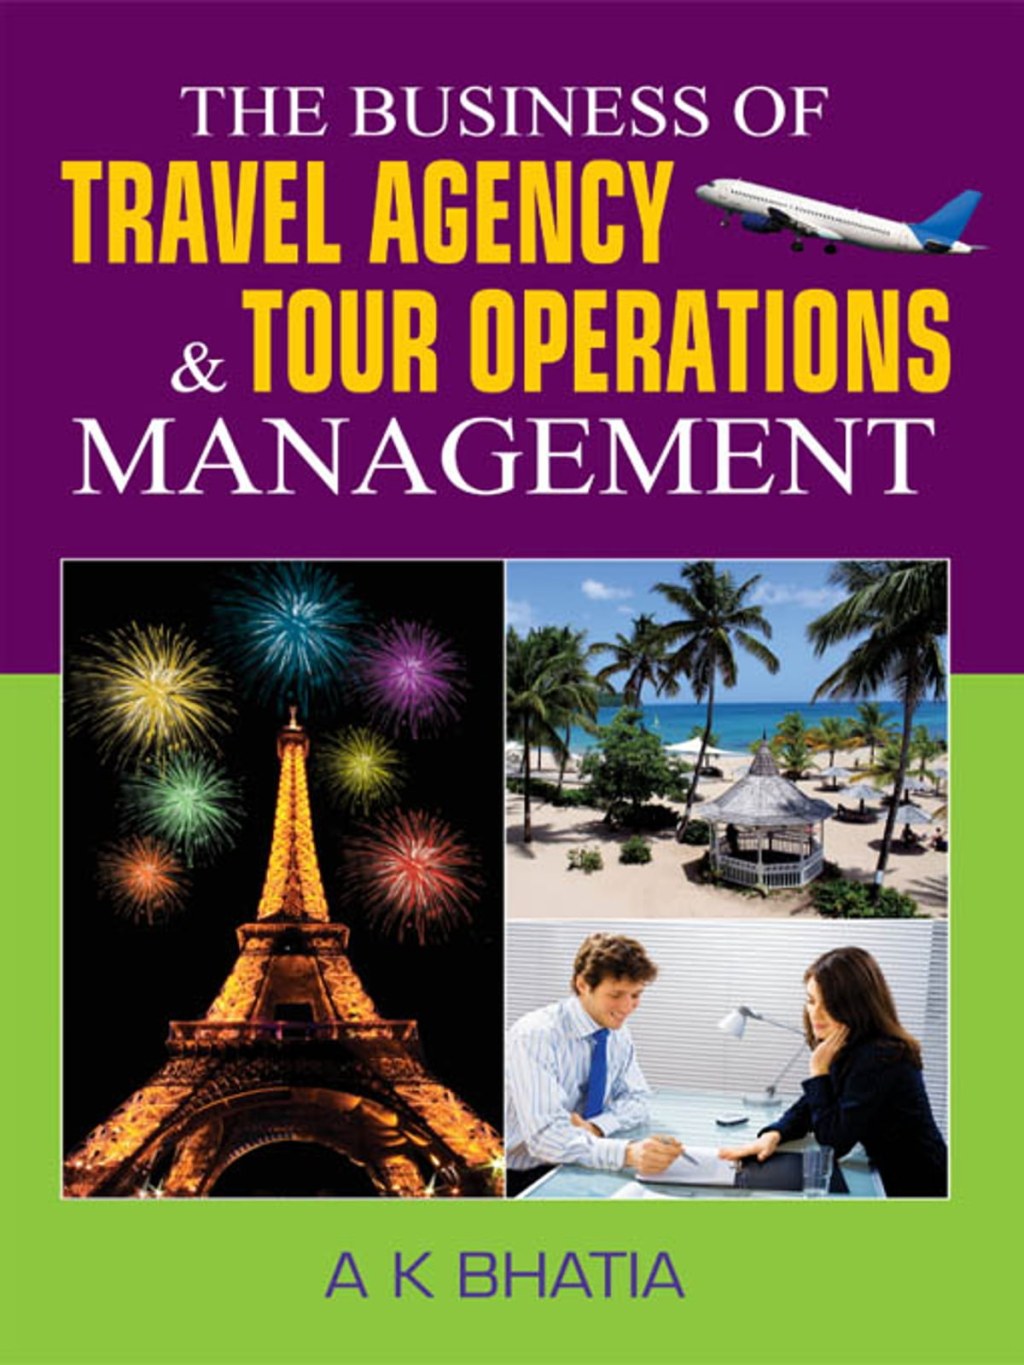 Picture of: The Bussiness of Travel Agency and Tour Operations Management eBook by A